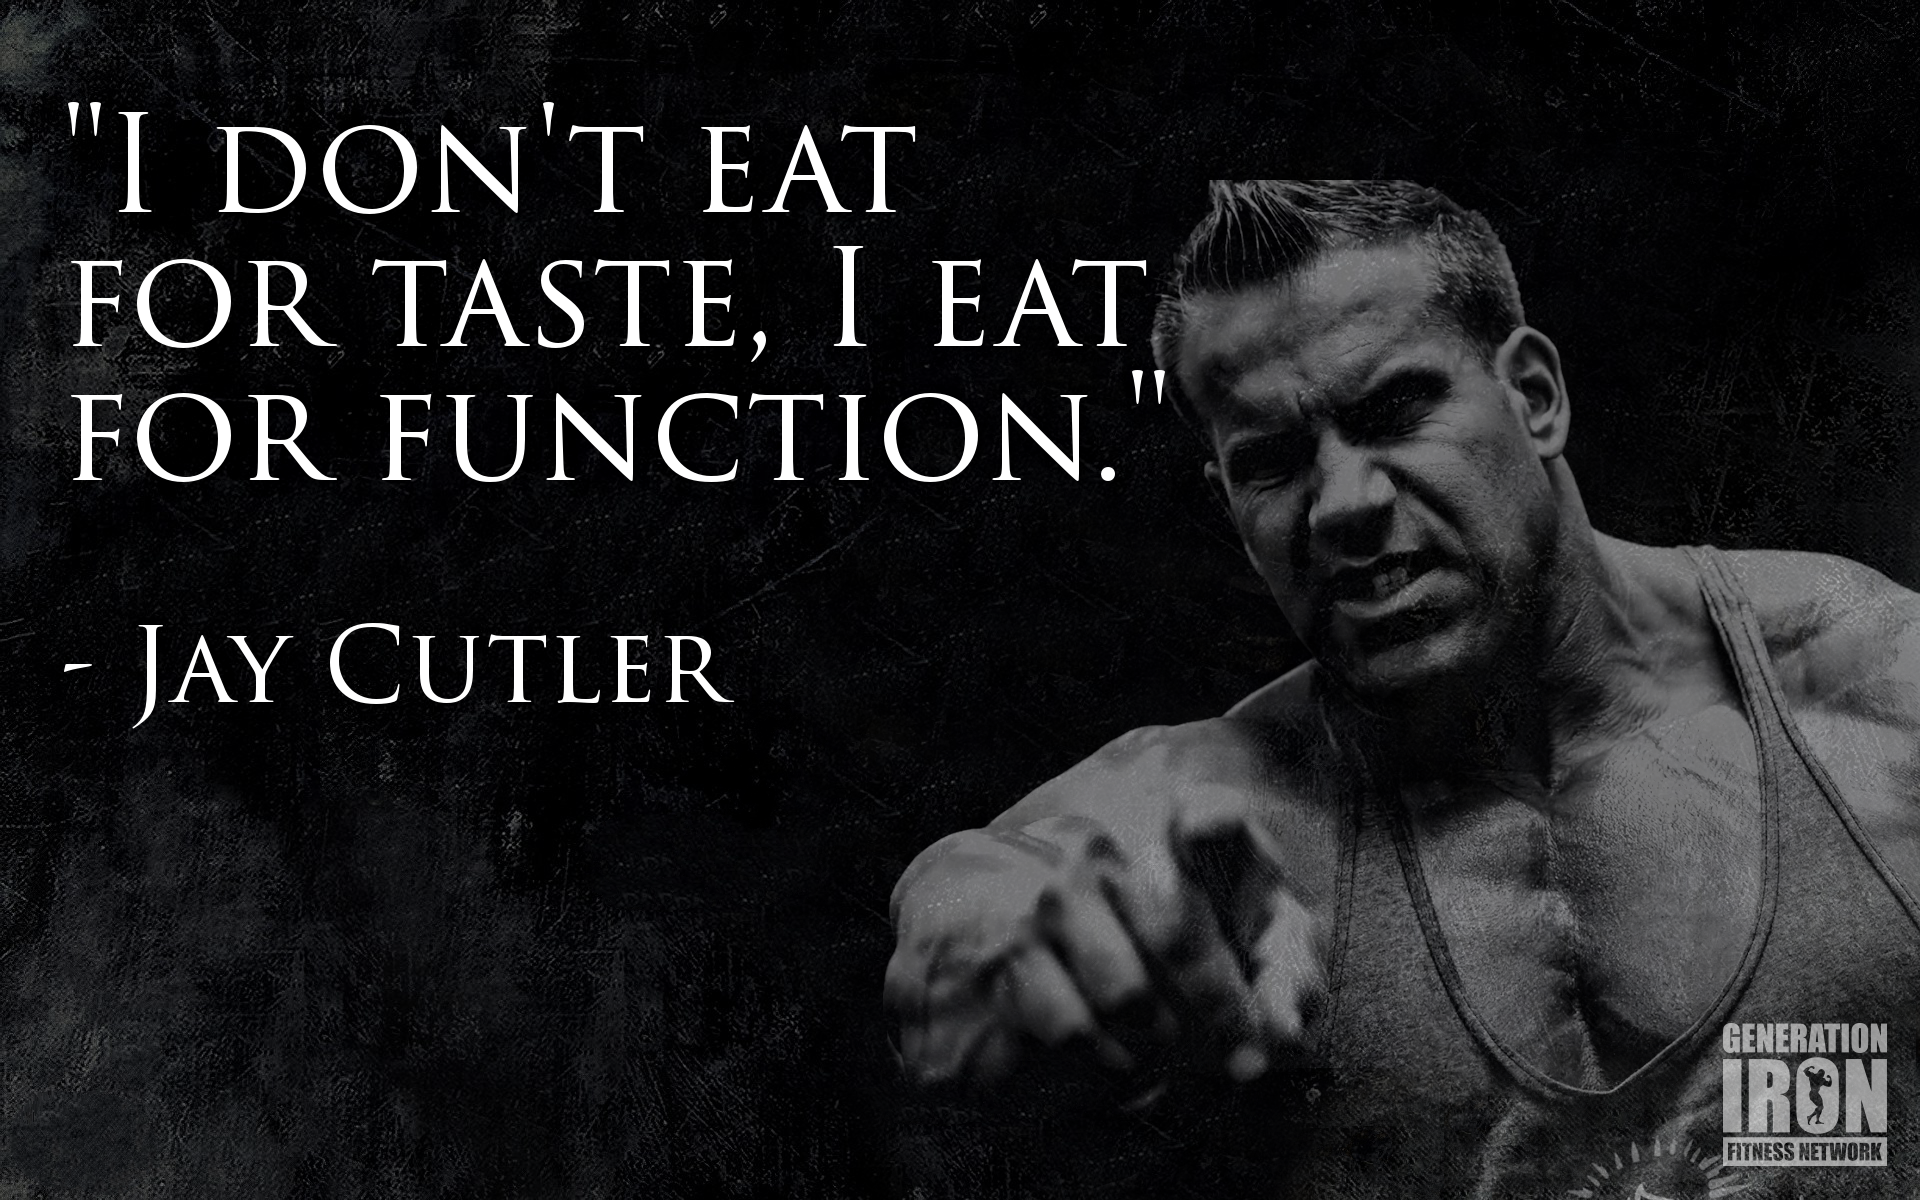 Generation Iron Jay Cutler Quote of the Week